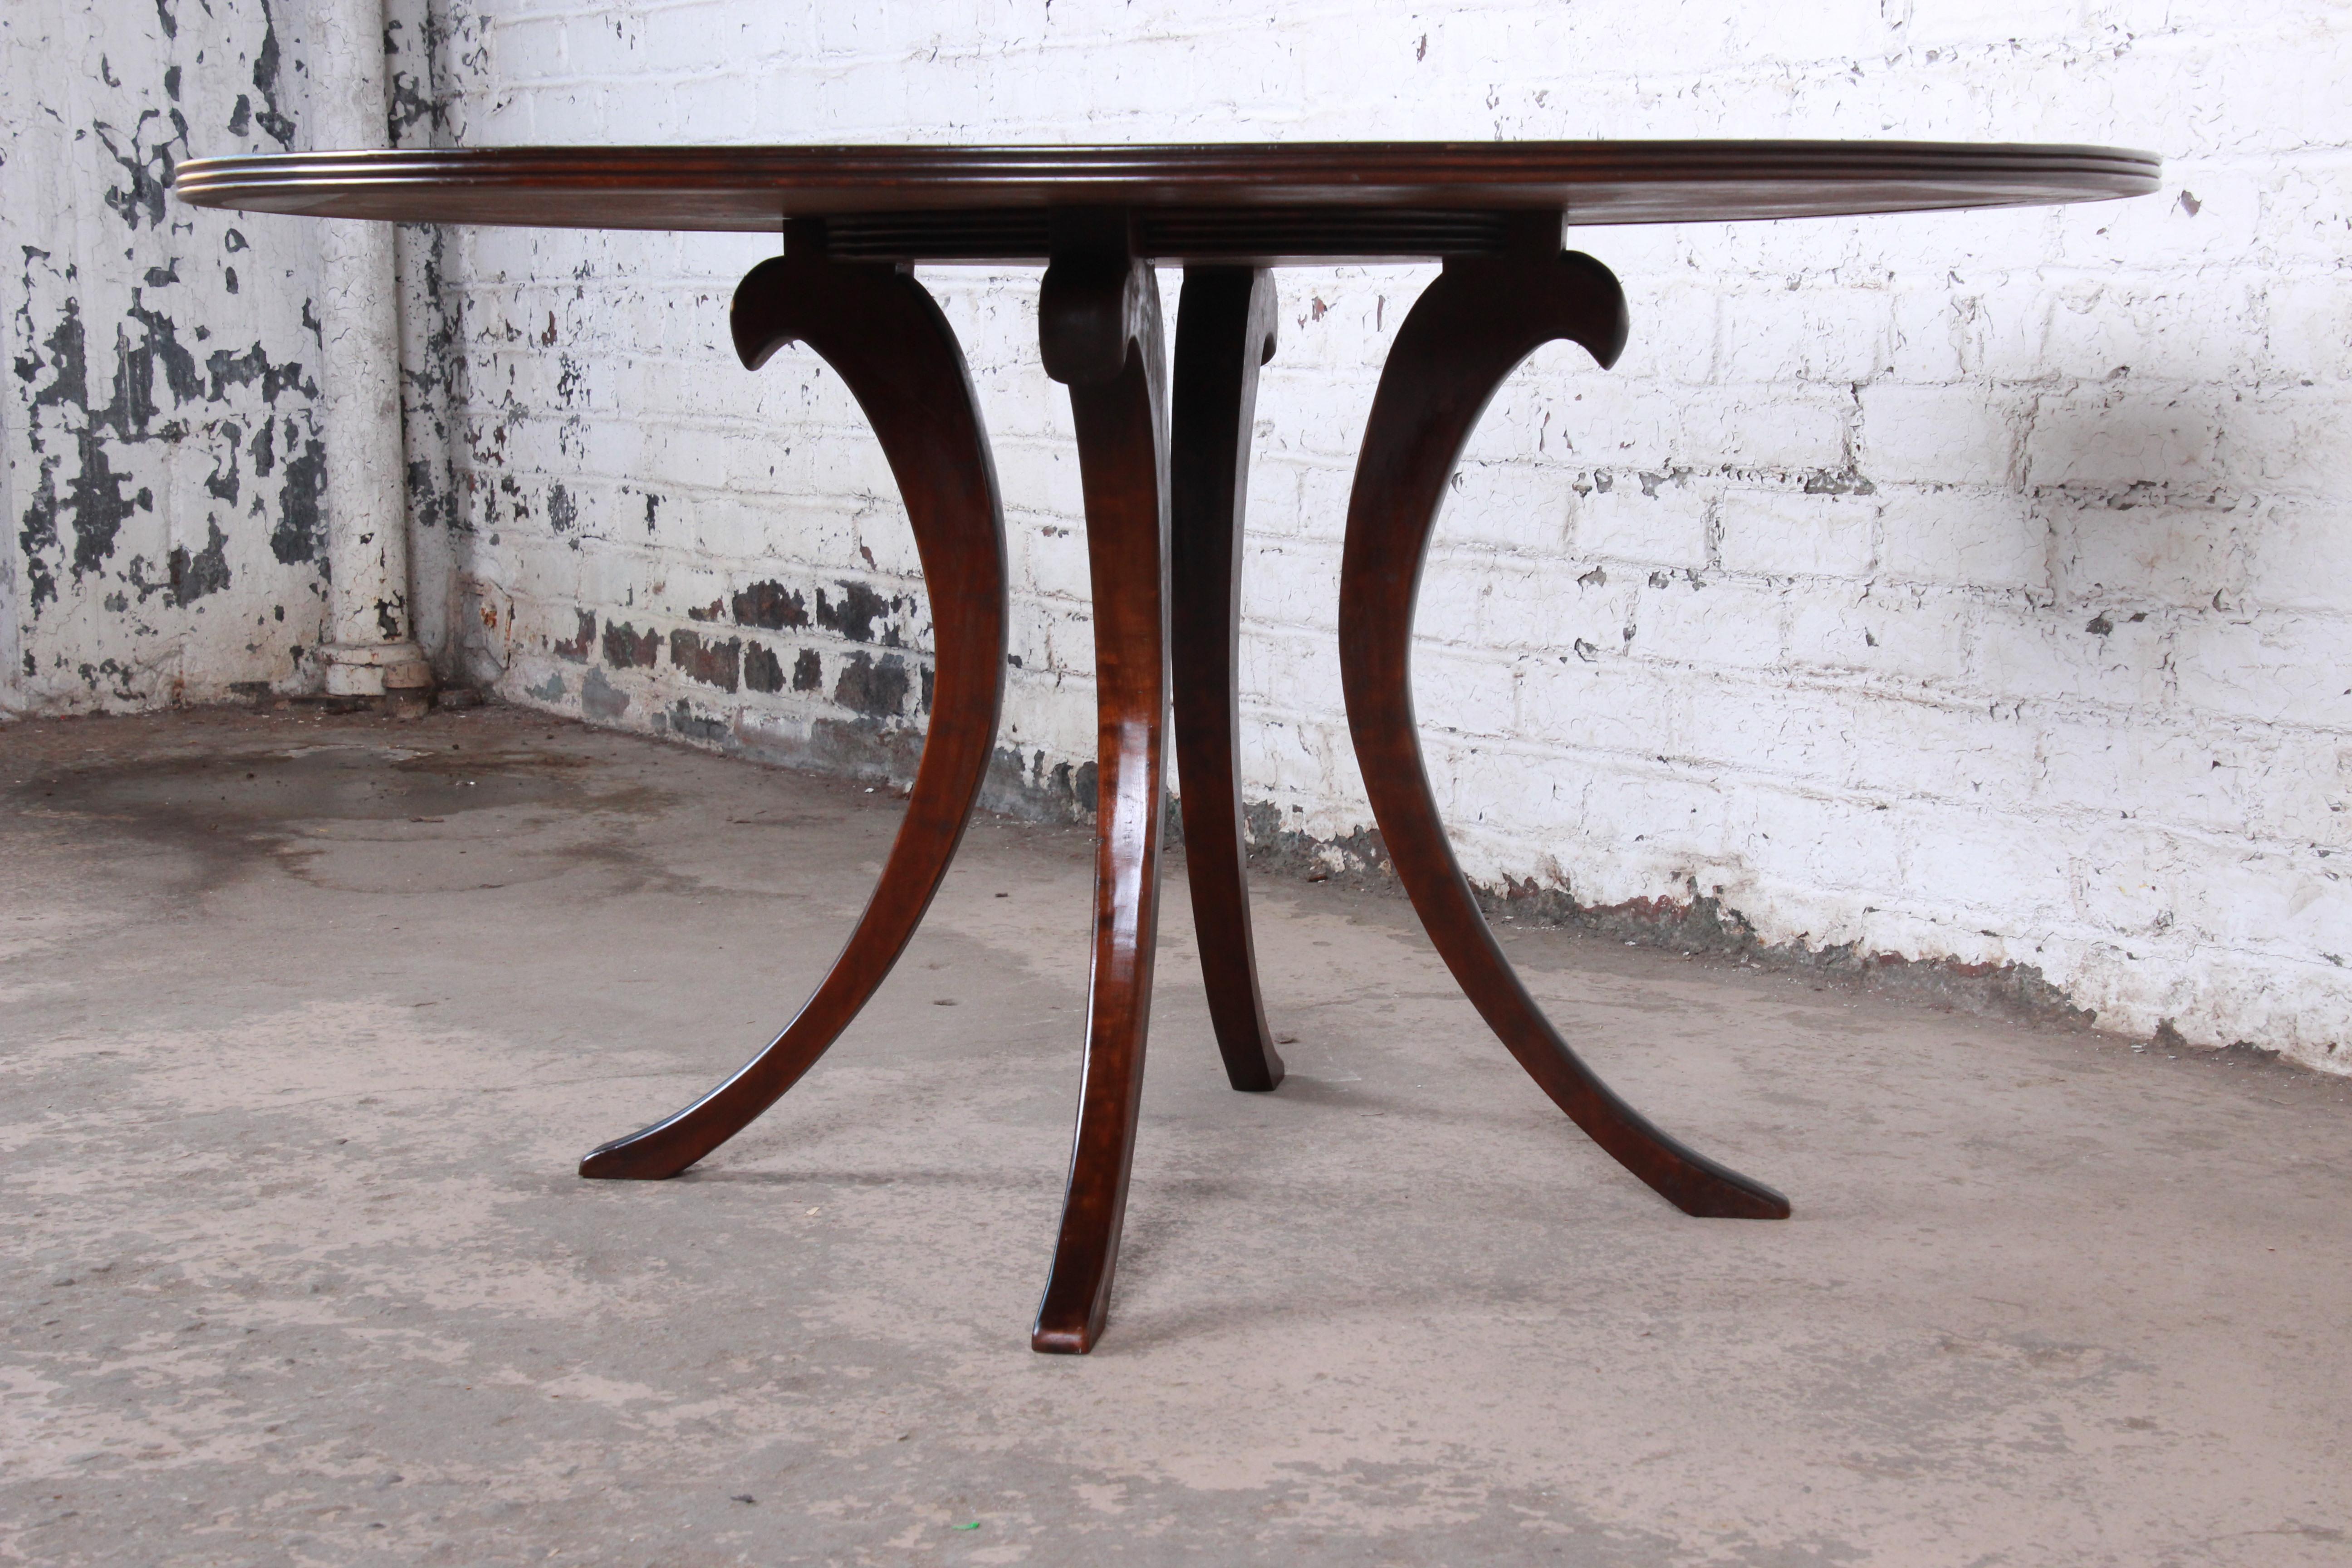 20th Century Modern Walnut Saber Leg Dining Table with Inlaid Starburst Parquetry Top